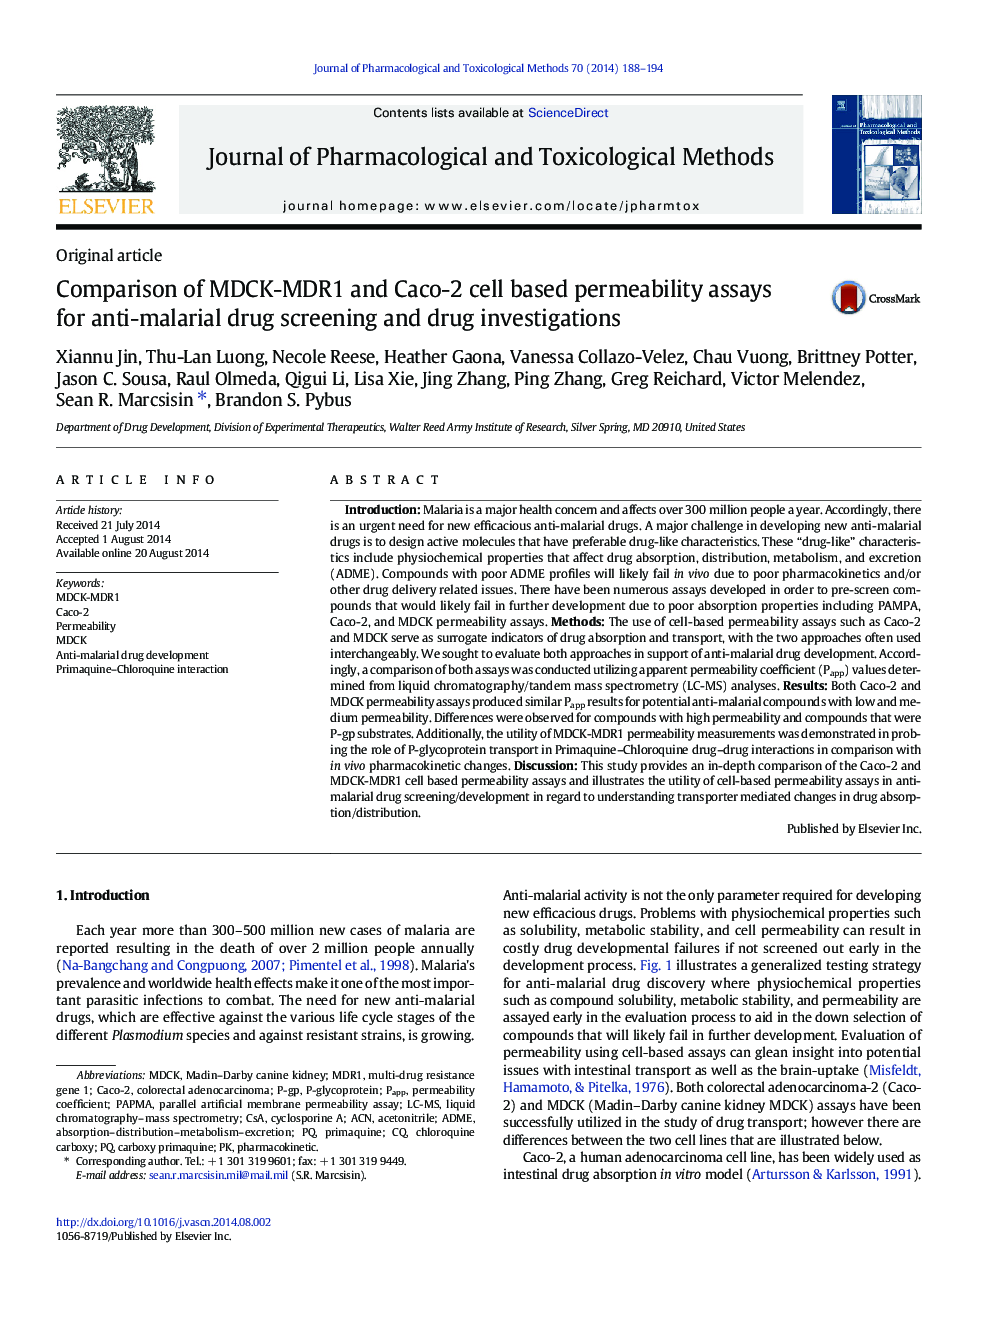 Comparison of MDCK-MDR1 and Caco-2 cell based permeability assays for anti-malarial drug screening and drug investigations